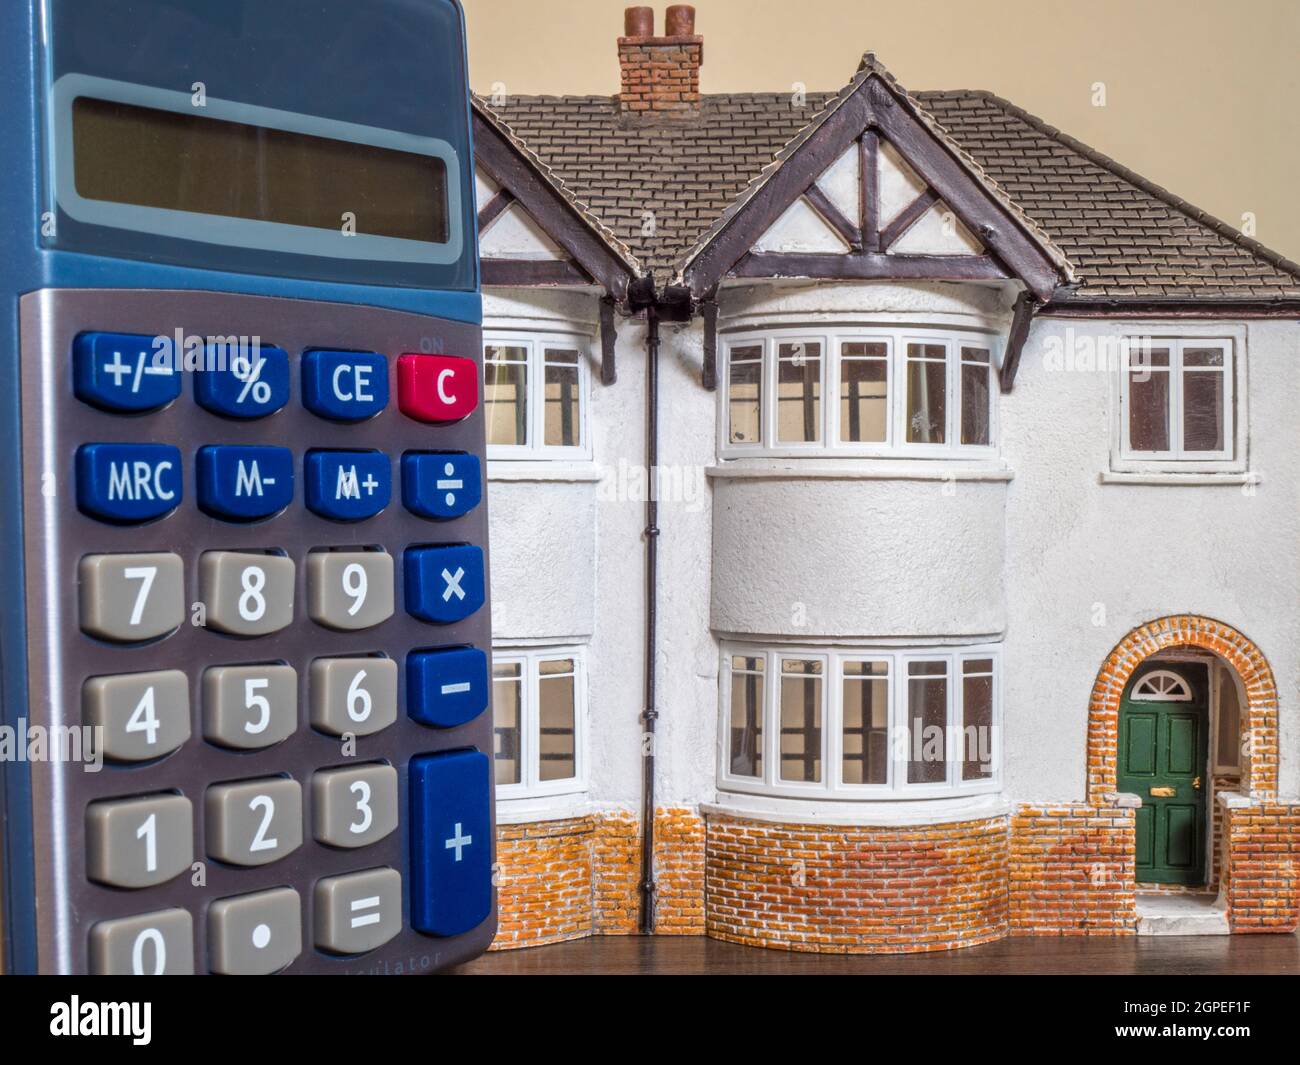 Housing / property market concept: A calculator next to a model / toy pair of semi-detached houses. Stock Photo